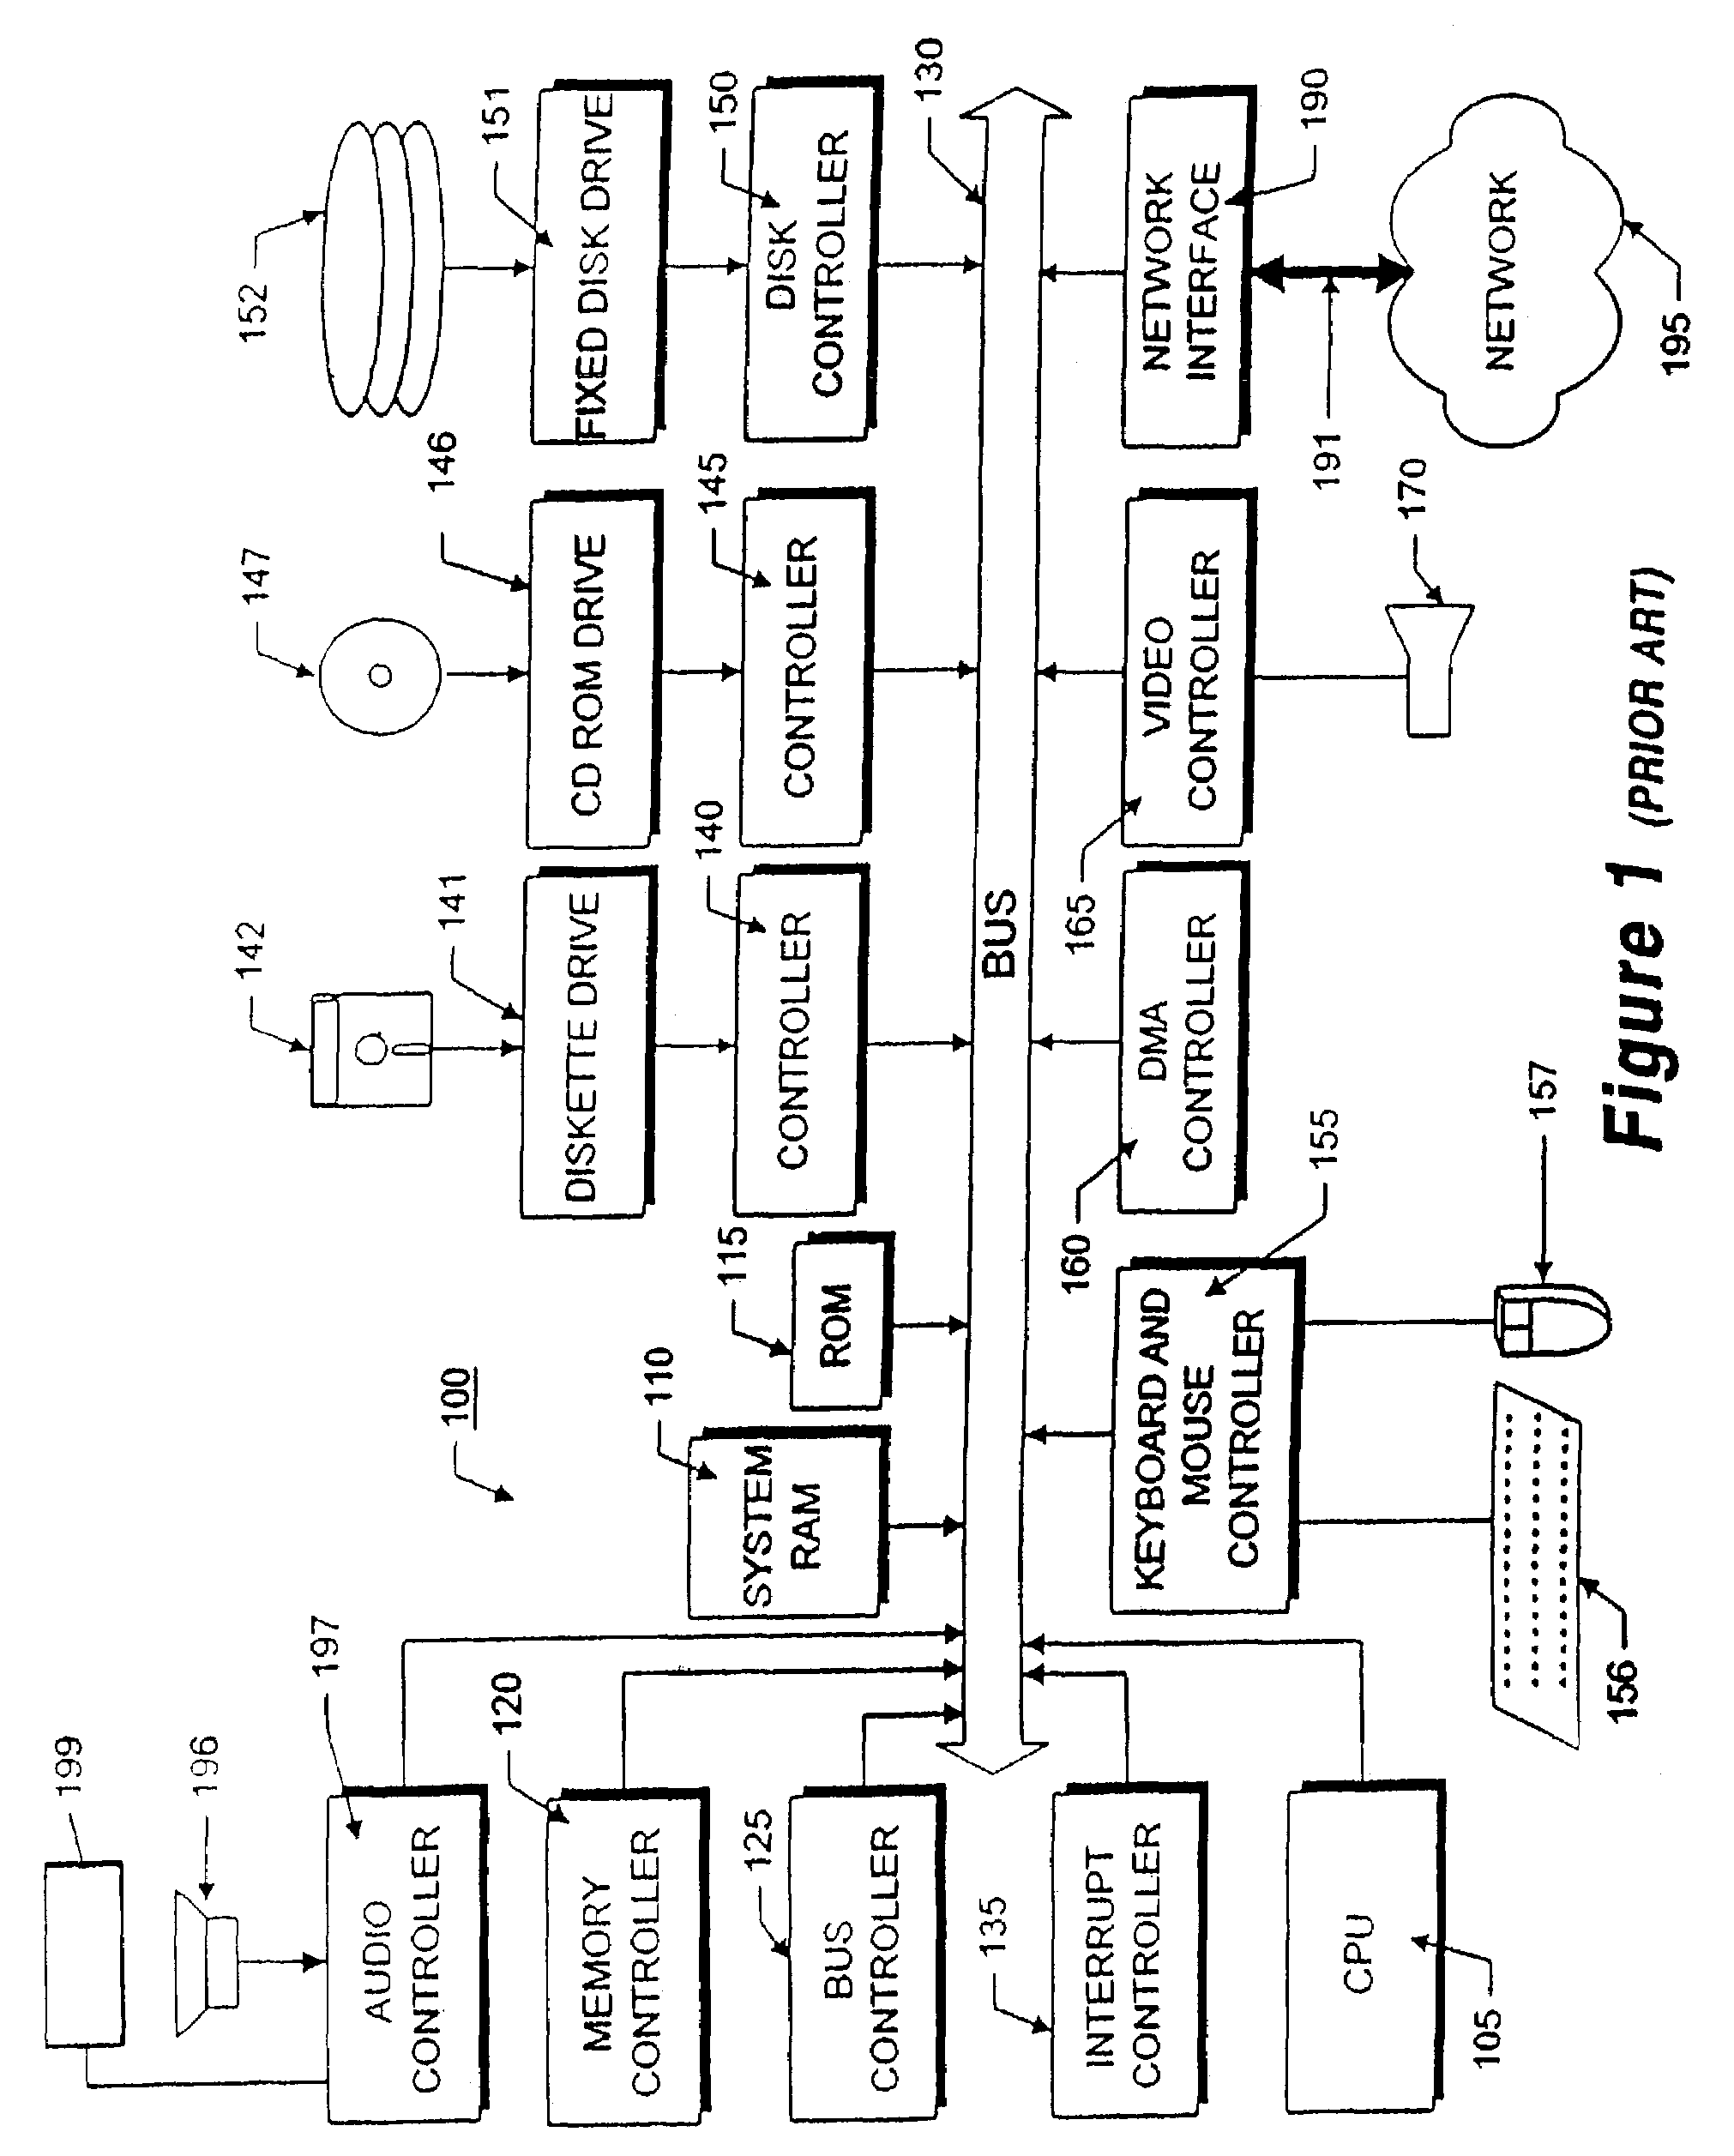 Method and apparatus for electronic mail interaction with grouped message types